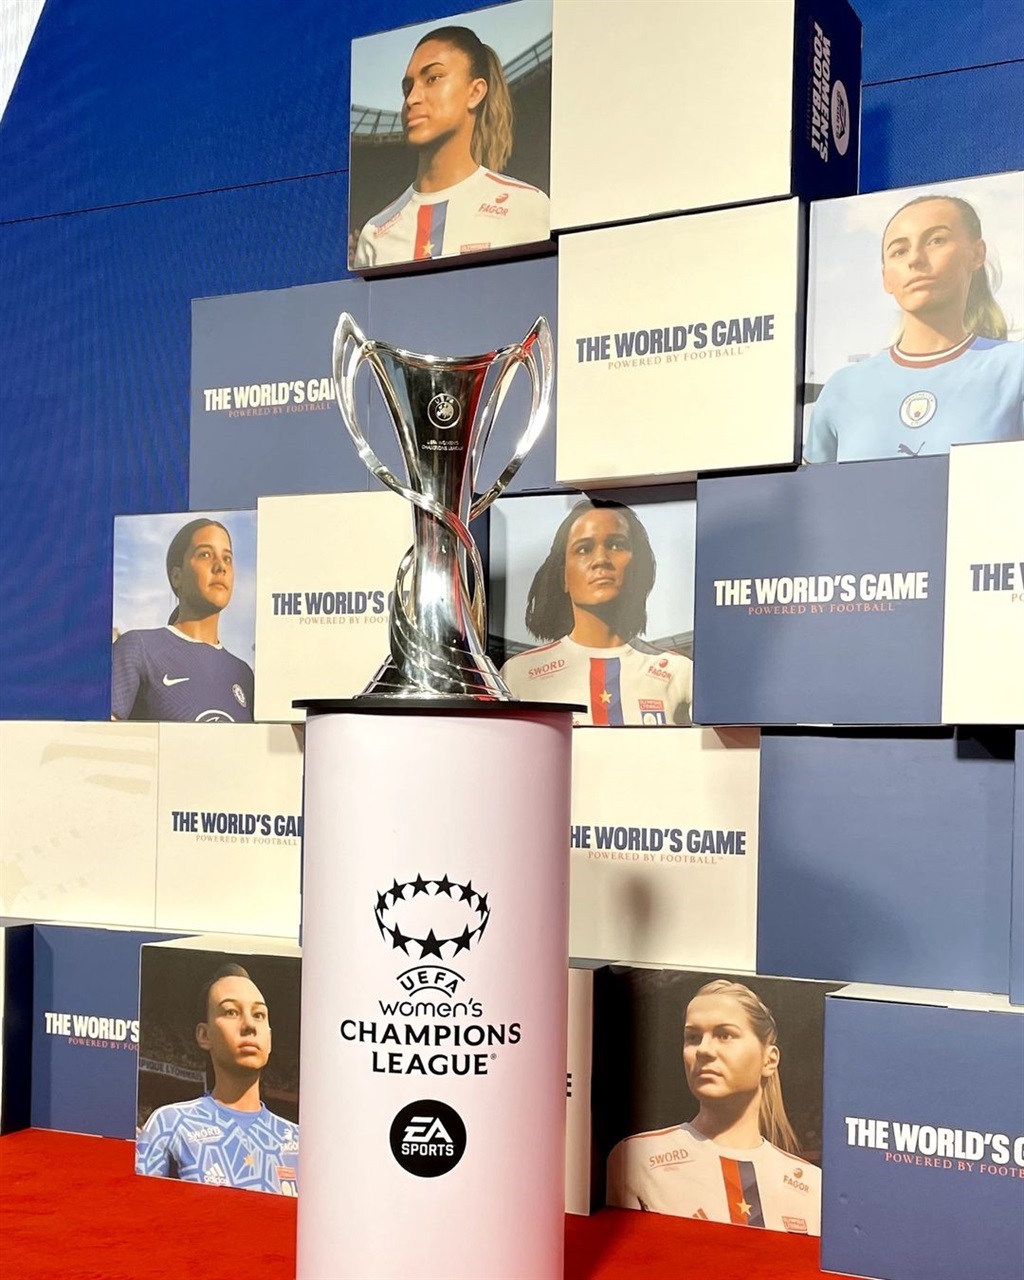 The UEFA Women's Champions League trophy on display.